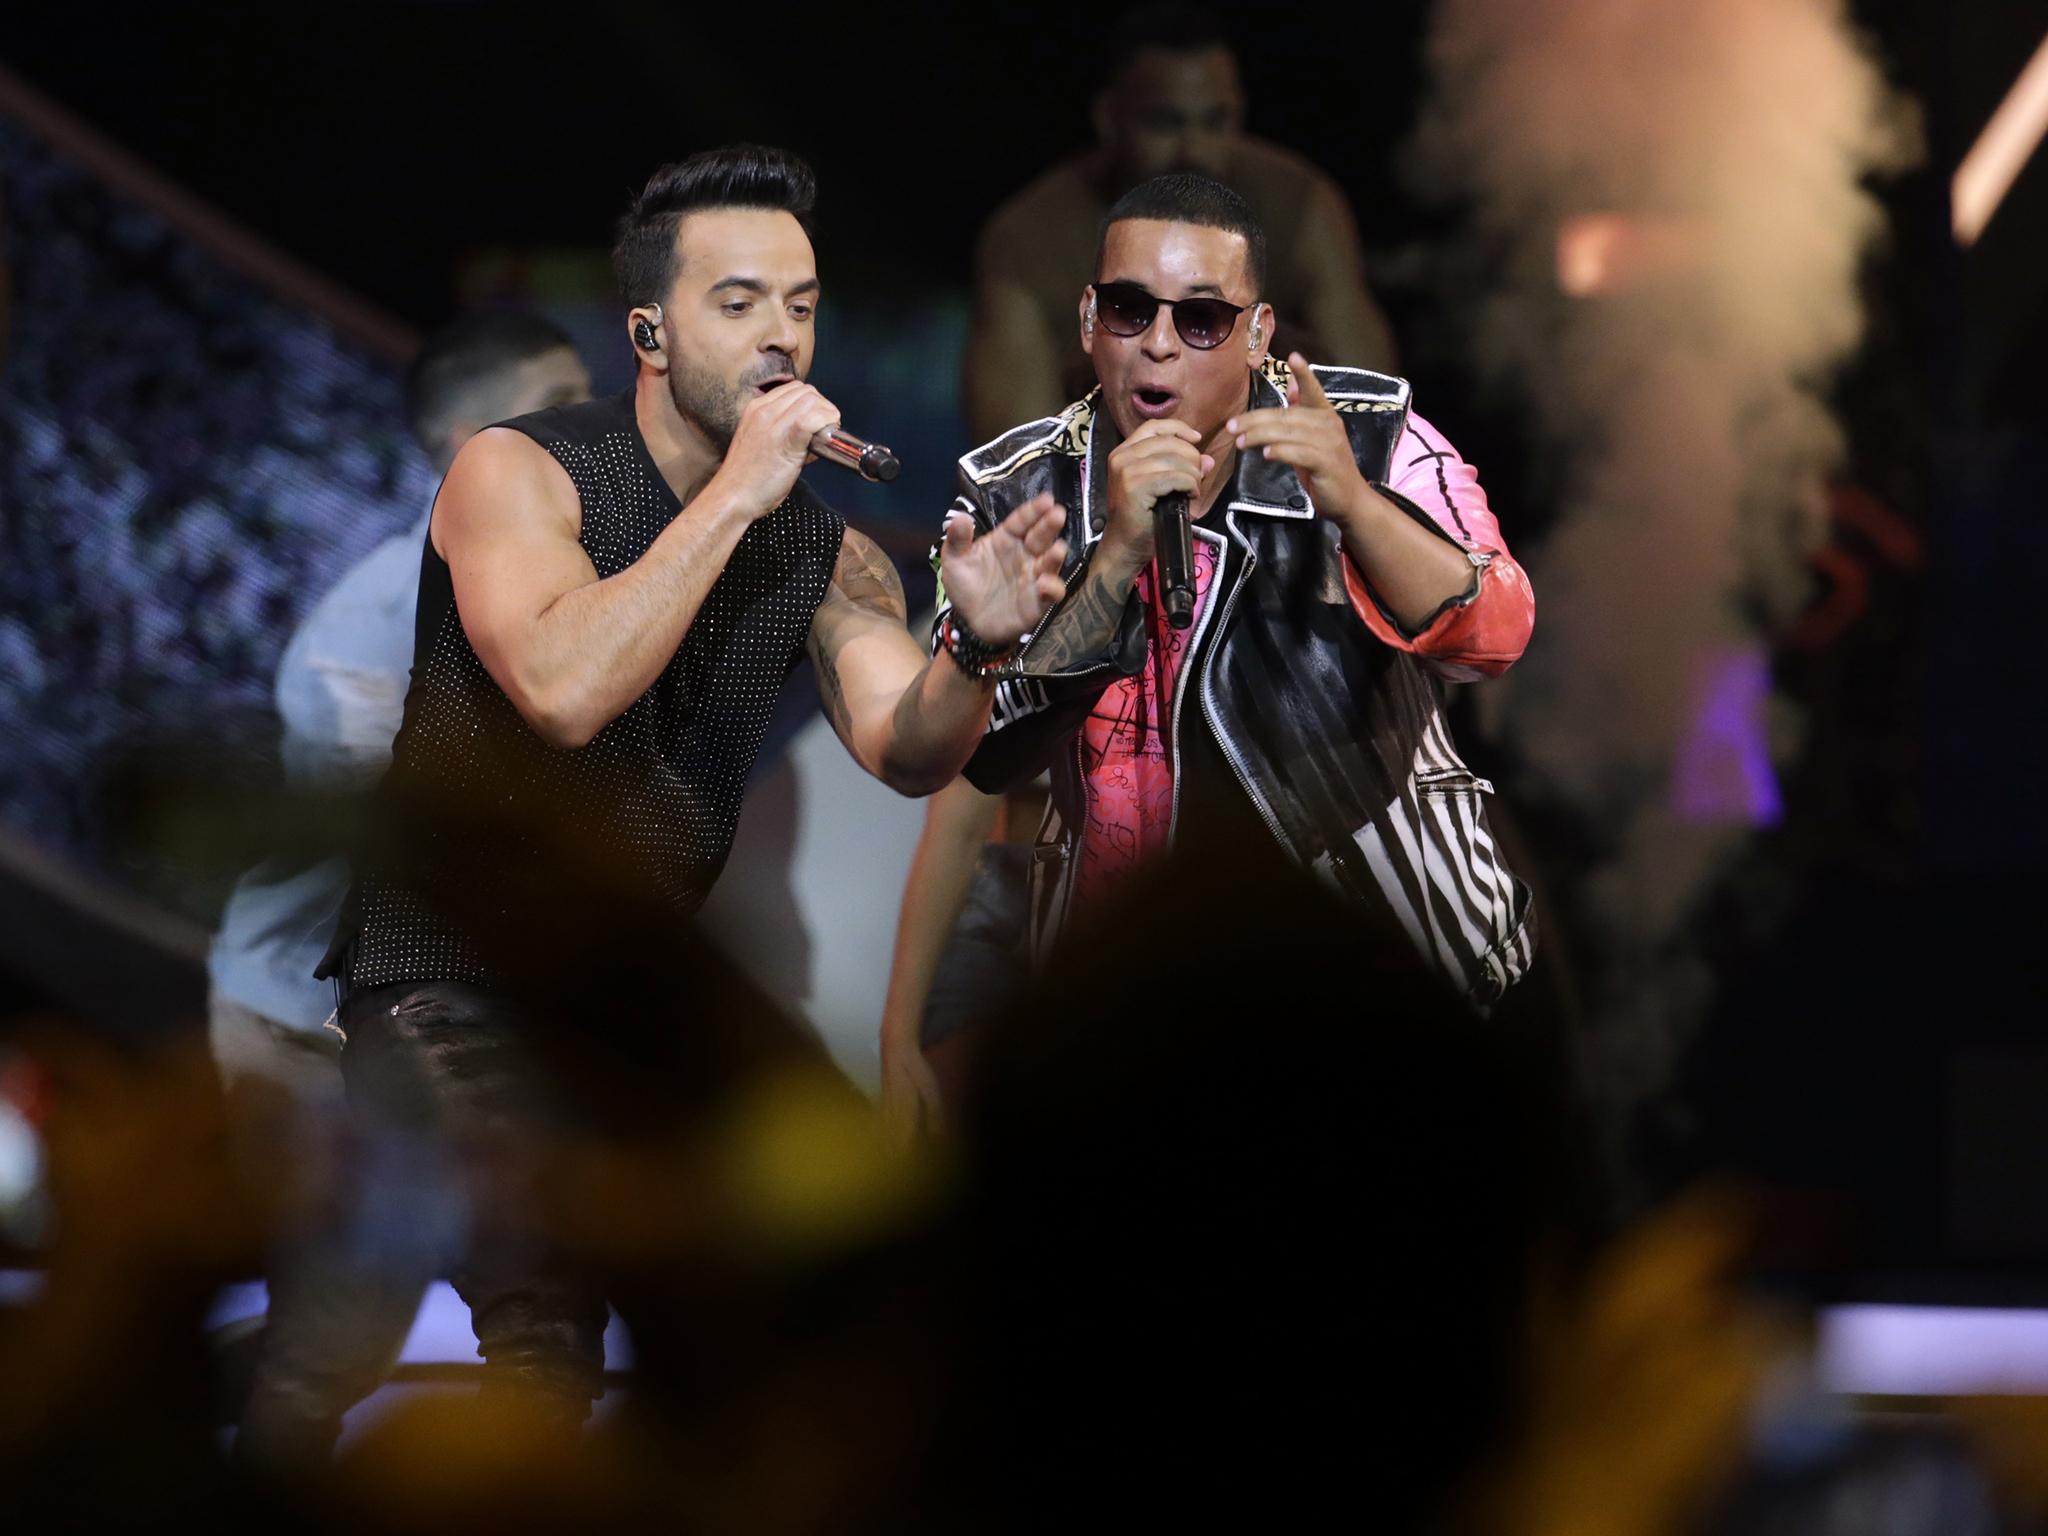 Luis Fonsi (left) and Daddy Yankee perform during the Latin Billboard Awards in Coral Gables, Florida